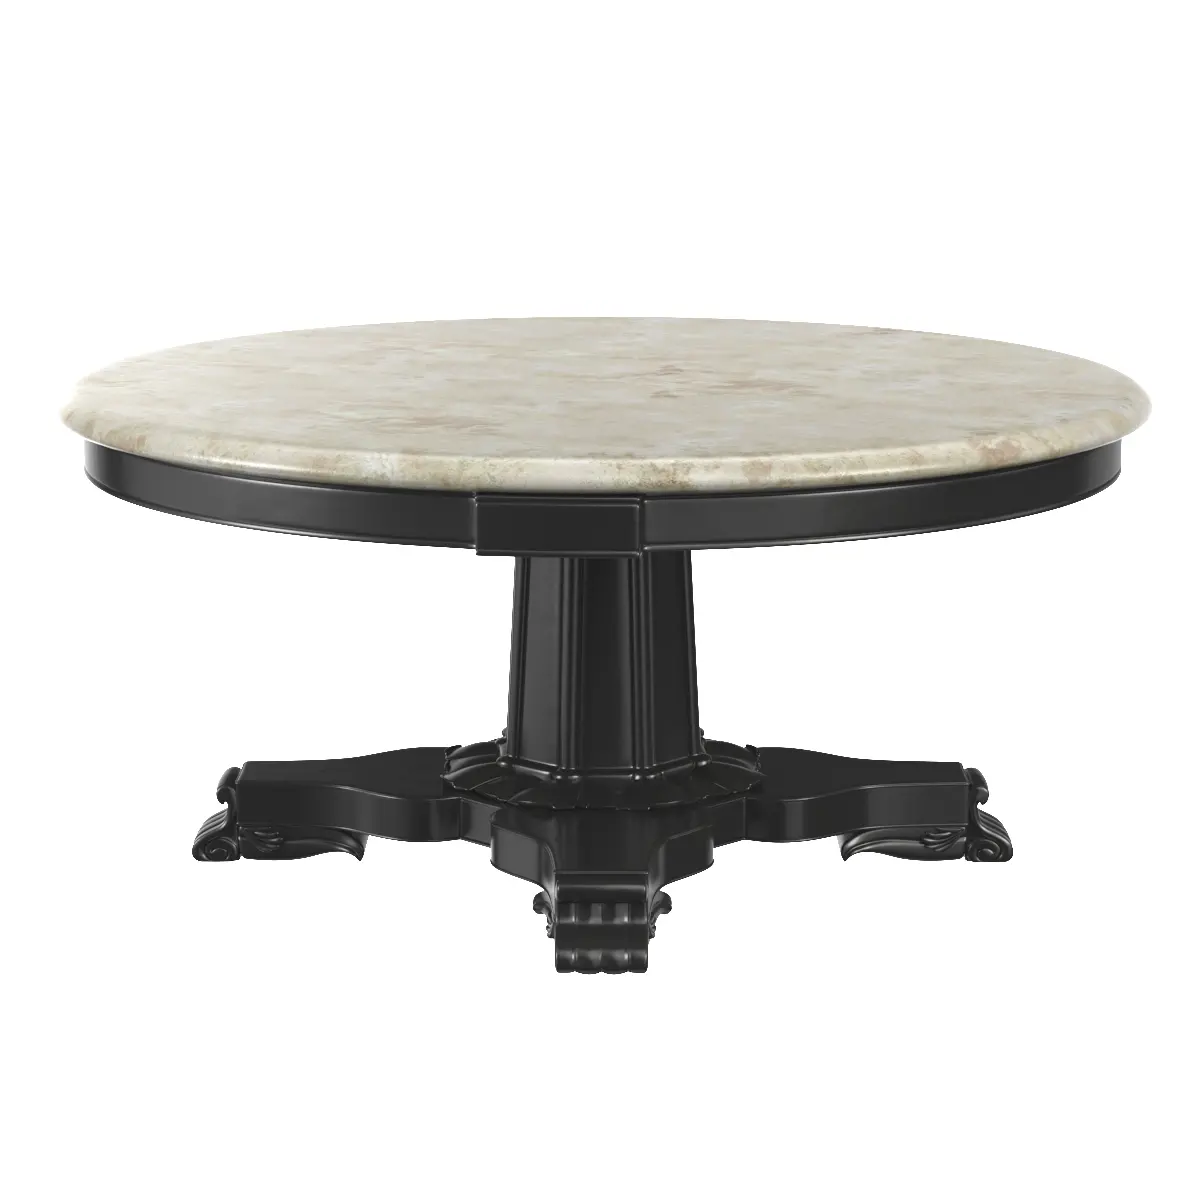 Anglo-Indian Marble and Ebonized Mahogany Centre Table 3D Model_06